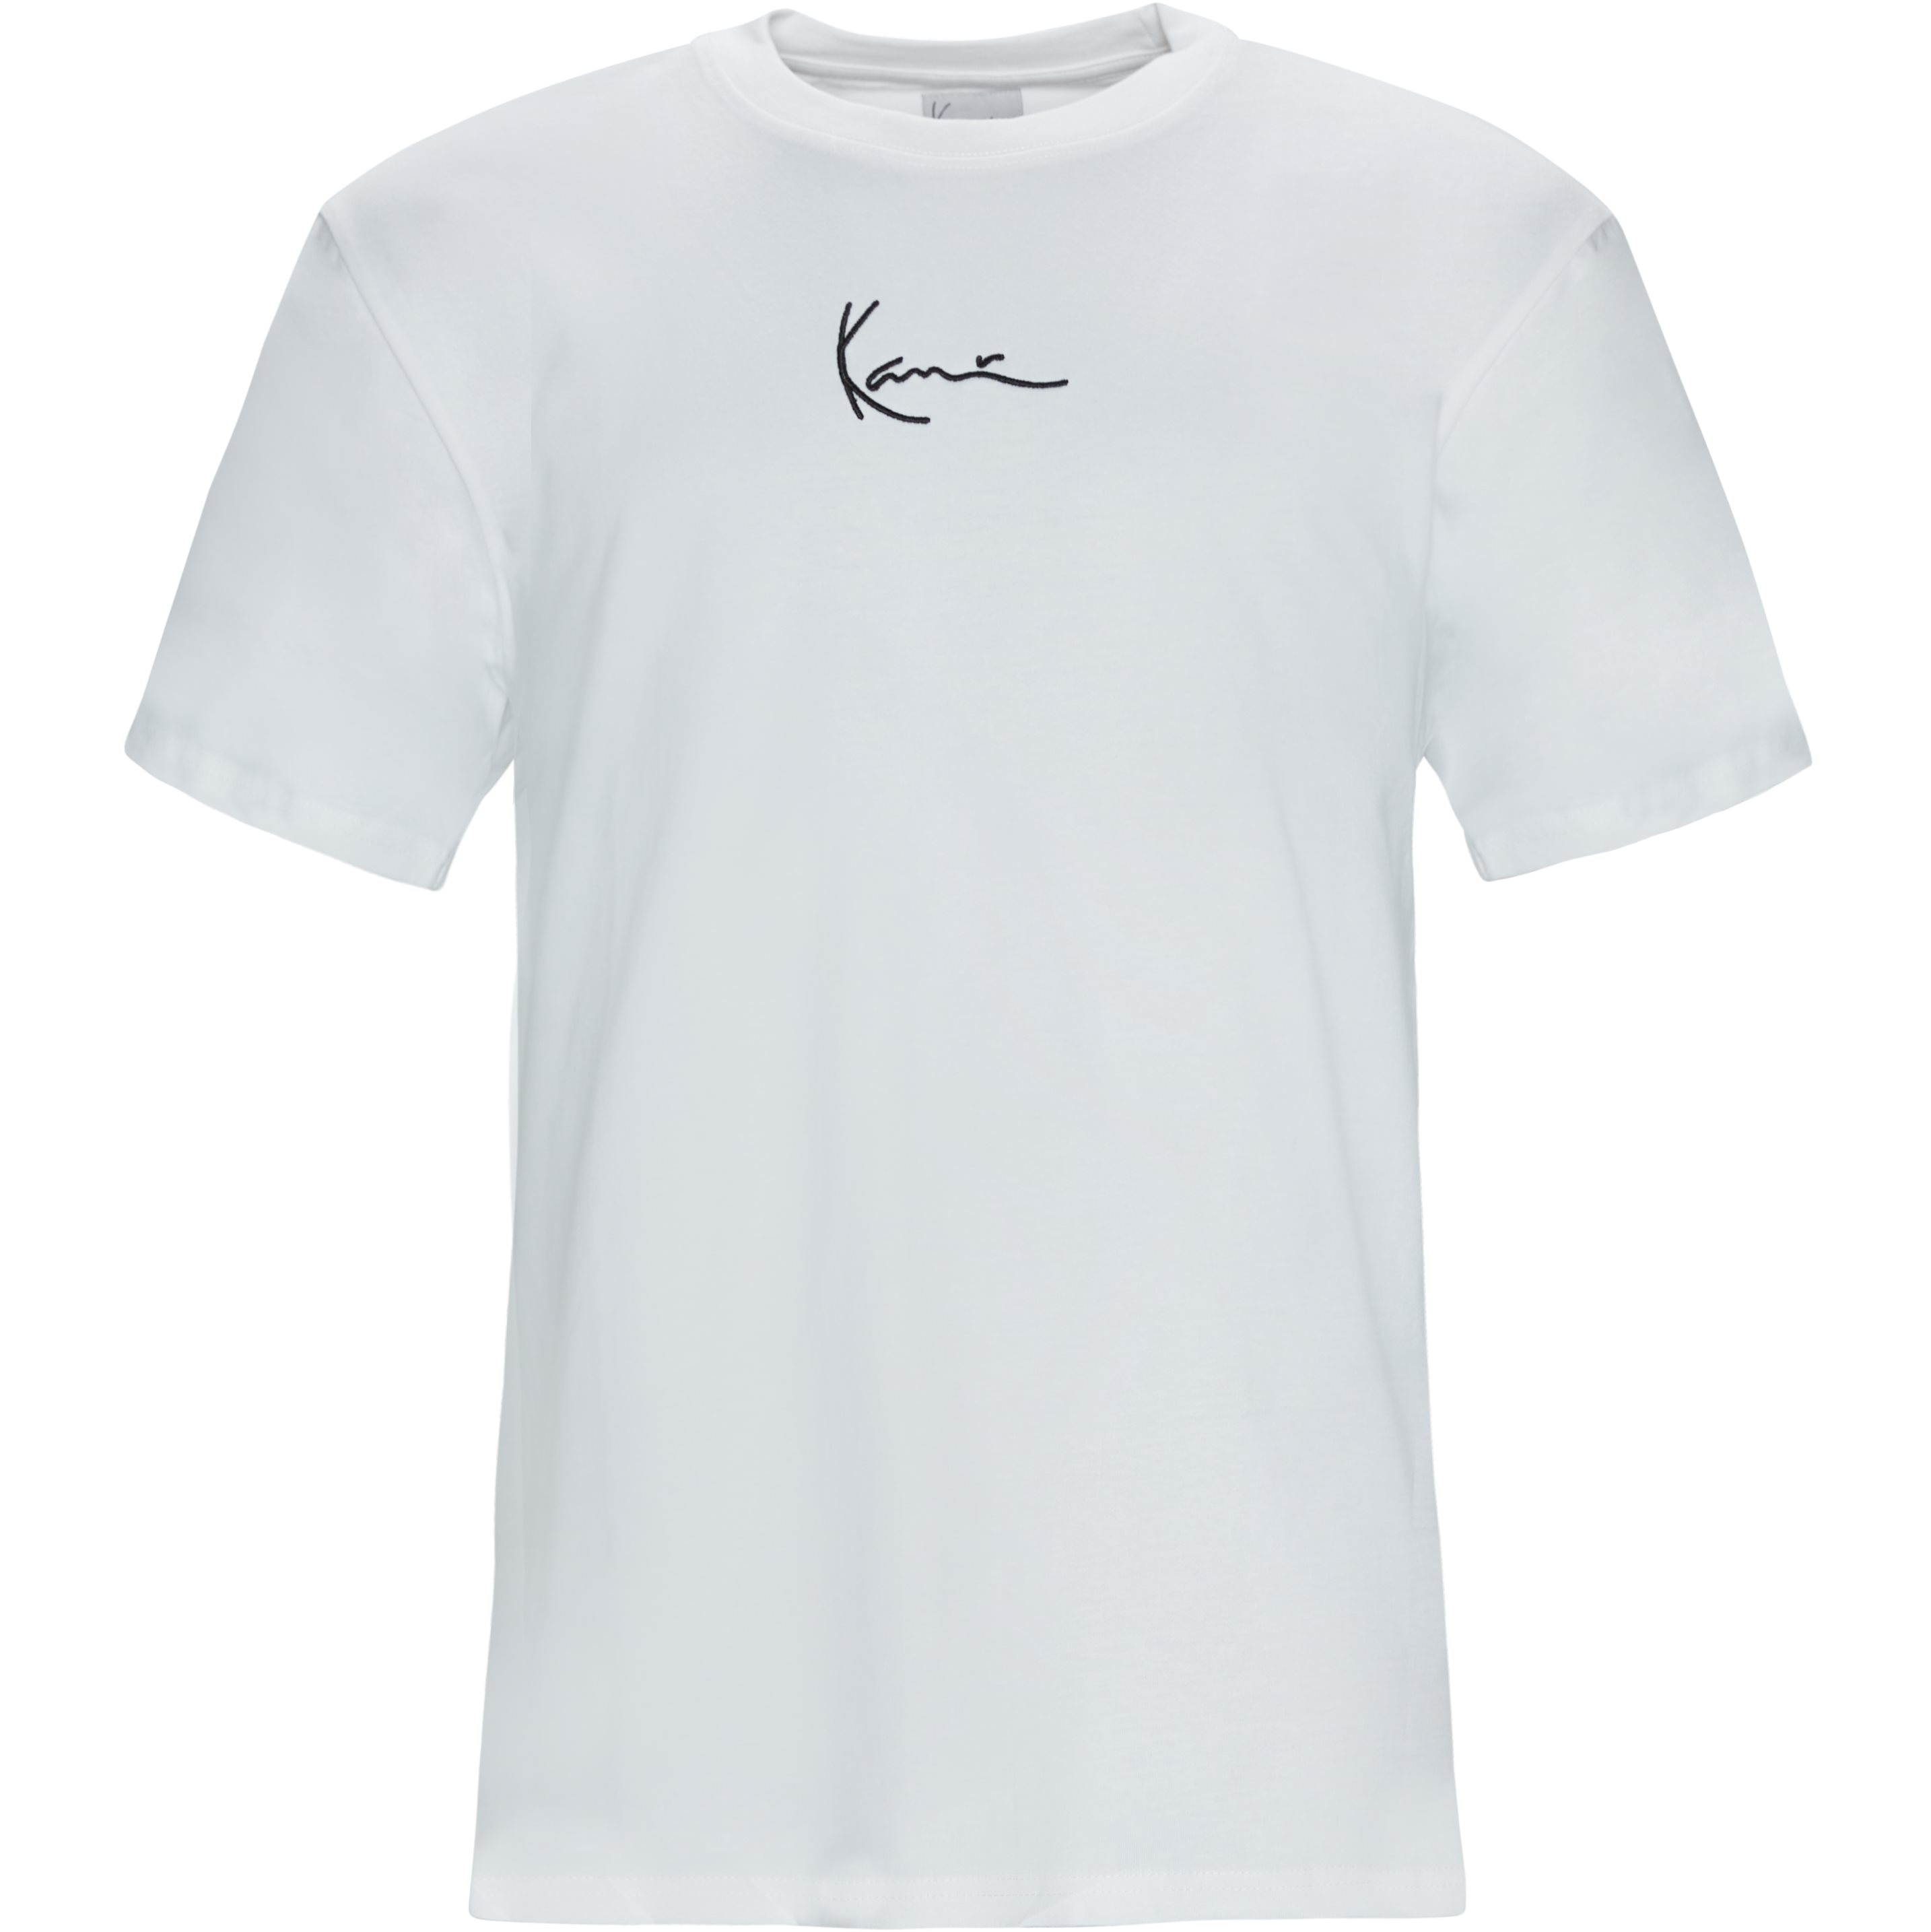 Small Signature Tee - T-shirts - Regular fit - White